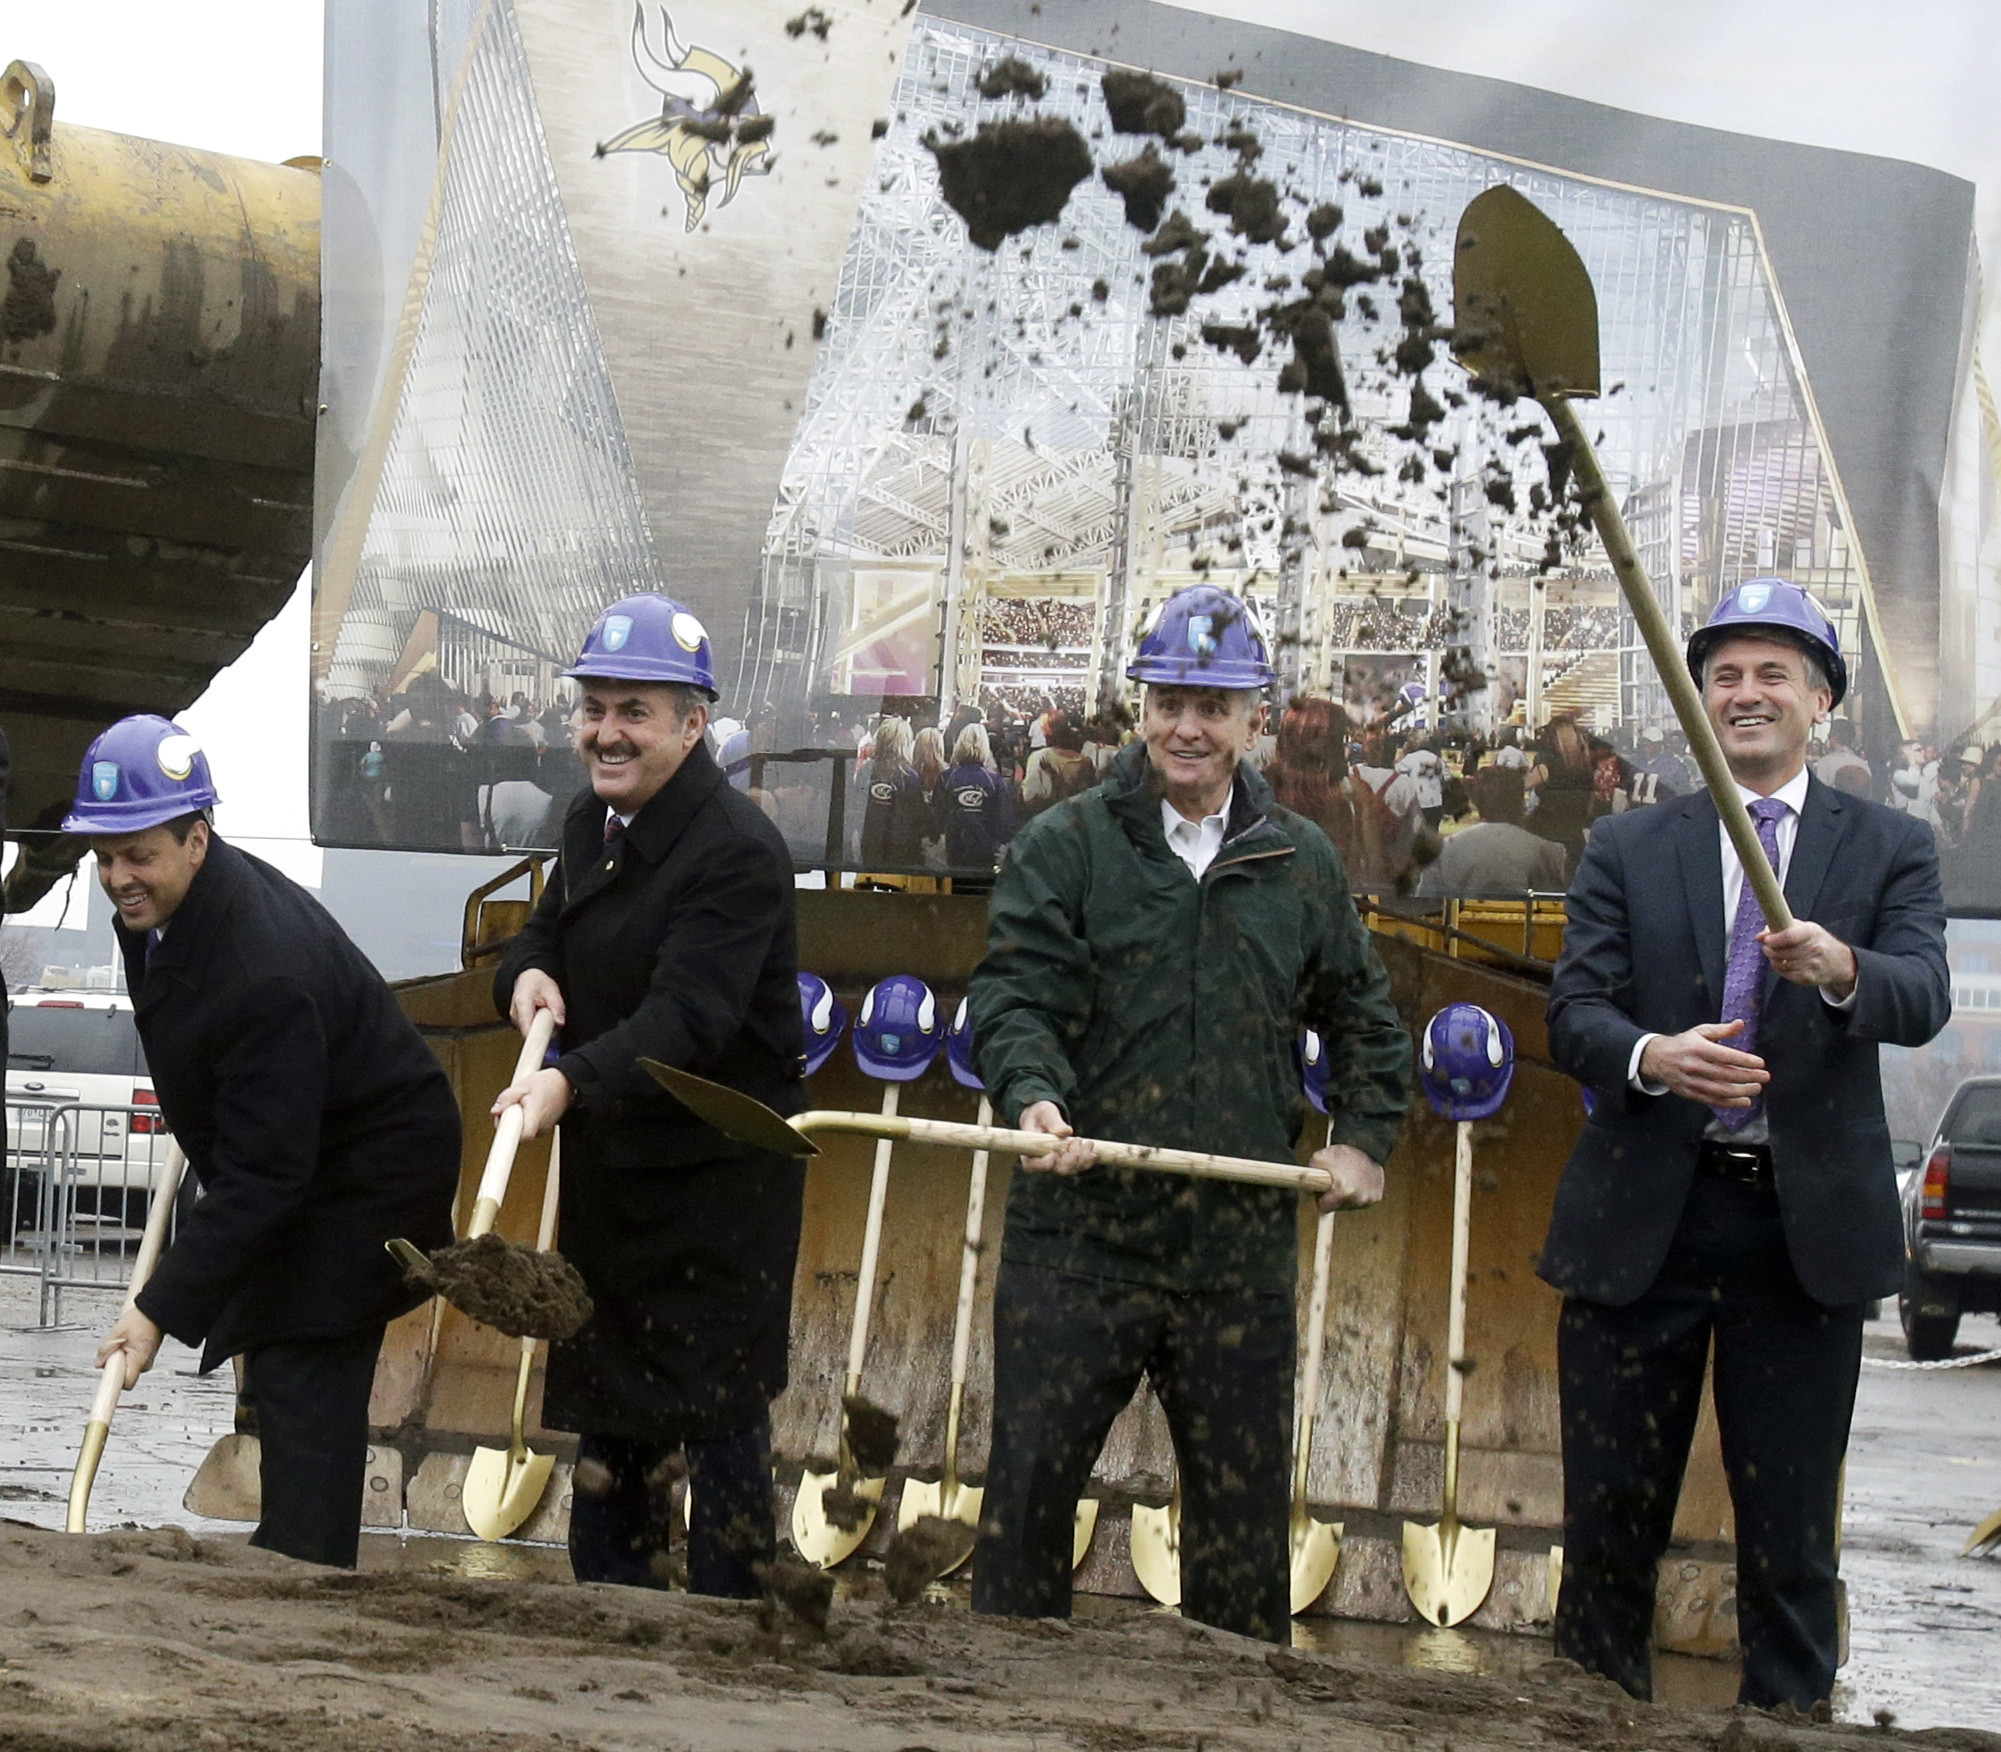 A large rendering of the new Minnesota Vikings football stadium stands behind Vikings owners Mark, left, and  Zygi Wilf, second from left, as they are joined by Gov. Mark Dayton, second from right, and Minneapolis Mayor R.T. Rybak during one of several ceremonial dirt tosses at groundbreaking ceremonies for the new Minnesota Vikings NFL football stadium, Tuesday  Dec. 3, 2013, in Minneapolis. AP Photo/Jim Mone)